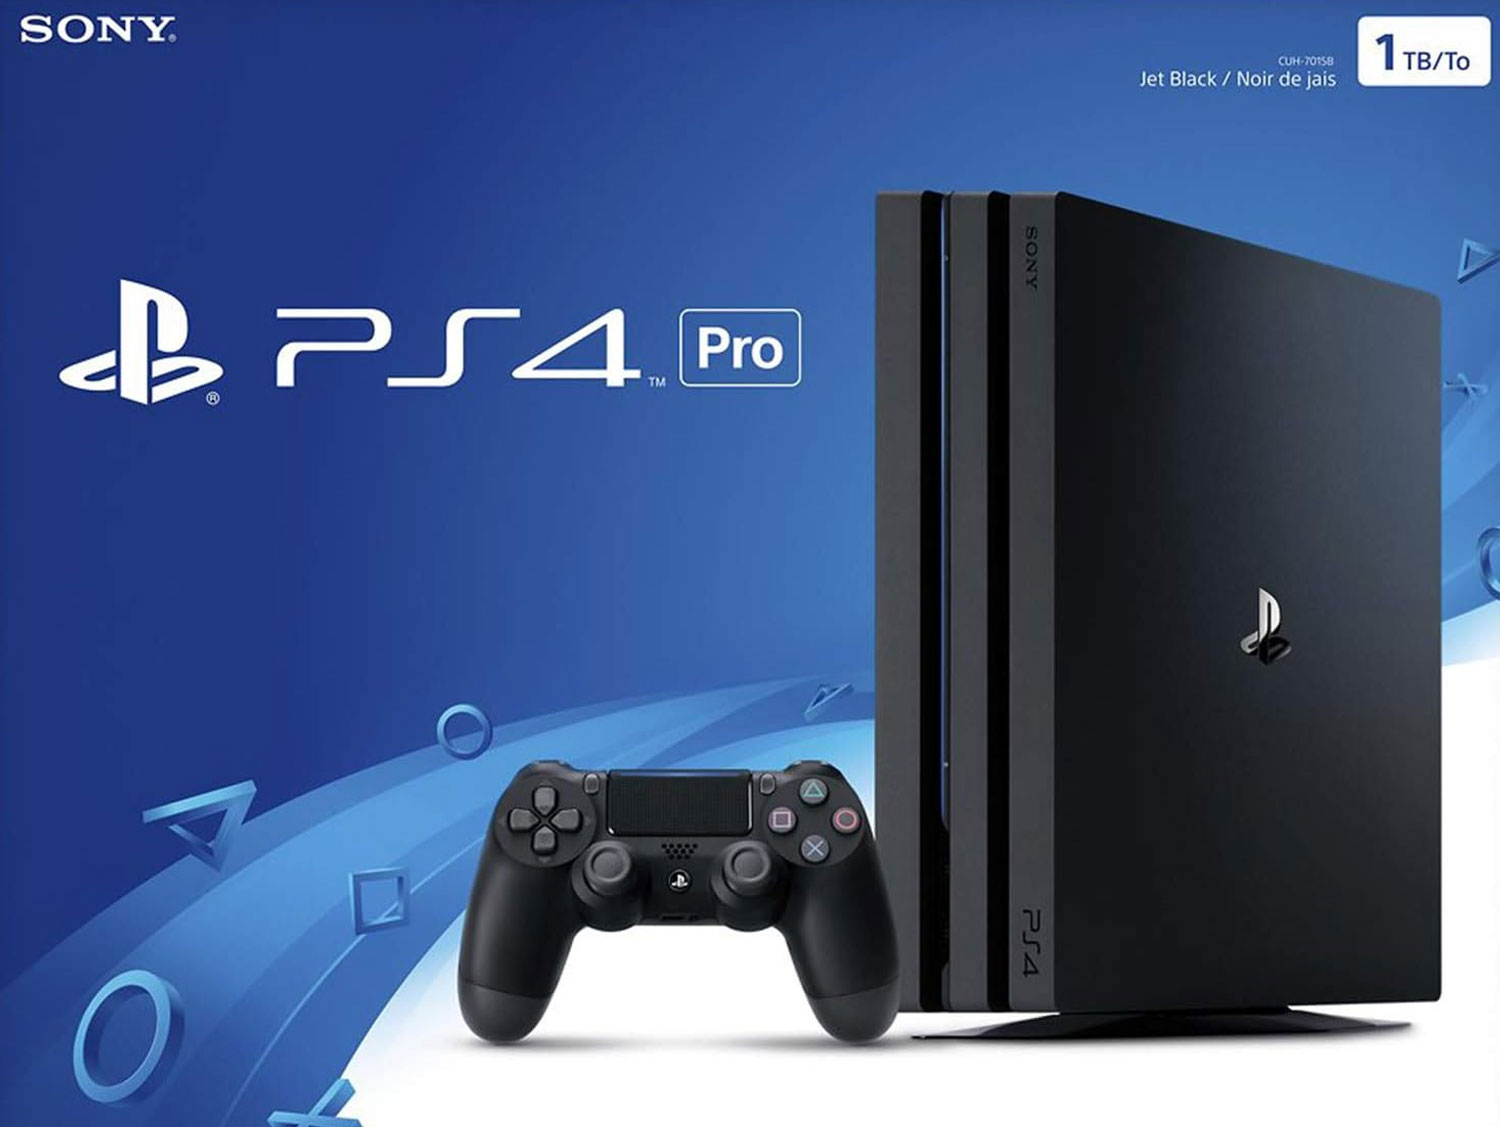 Sony PlayStation PS4 Pro 1TB console on display - Rent in Sri Lanka